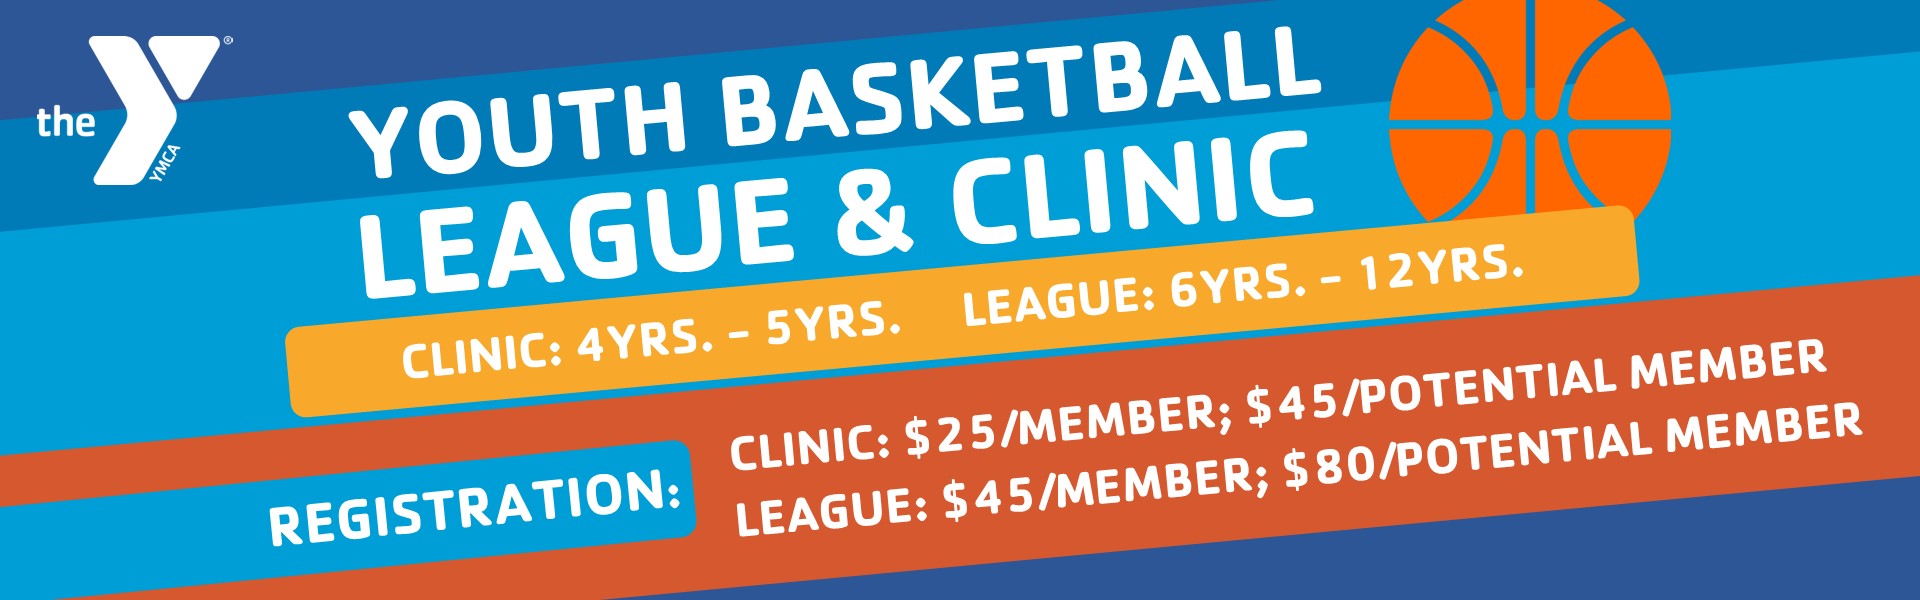 YOUTH BASKETBALL CLINIC